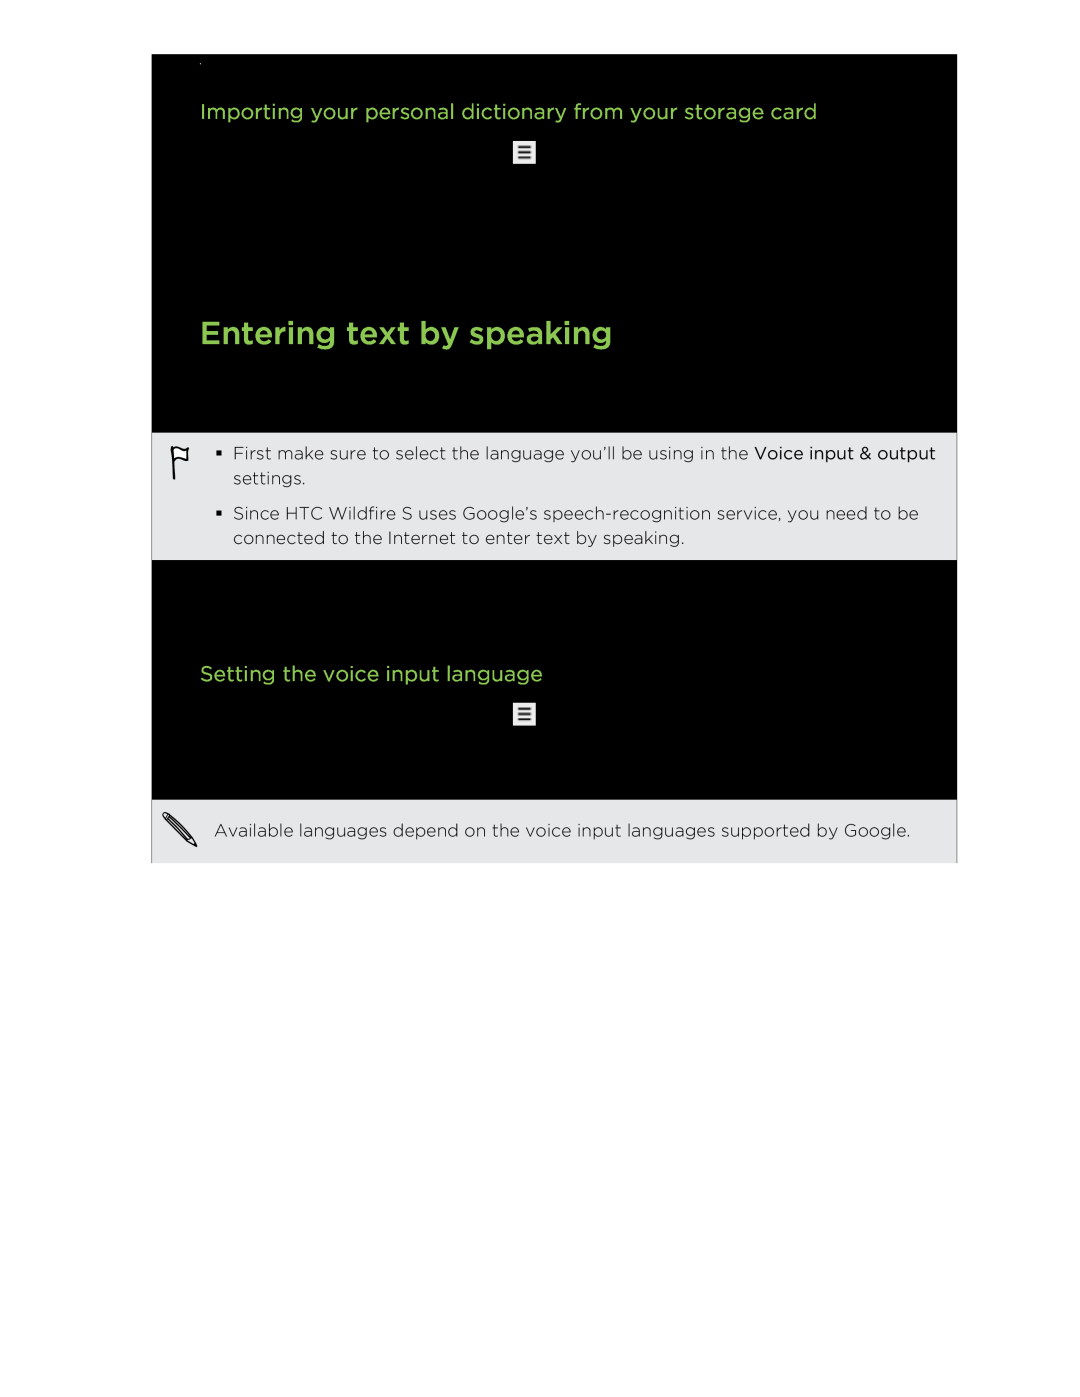 HTC S manual Entering text by speaking, Importing your personal dictionary from your storage card 